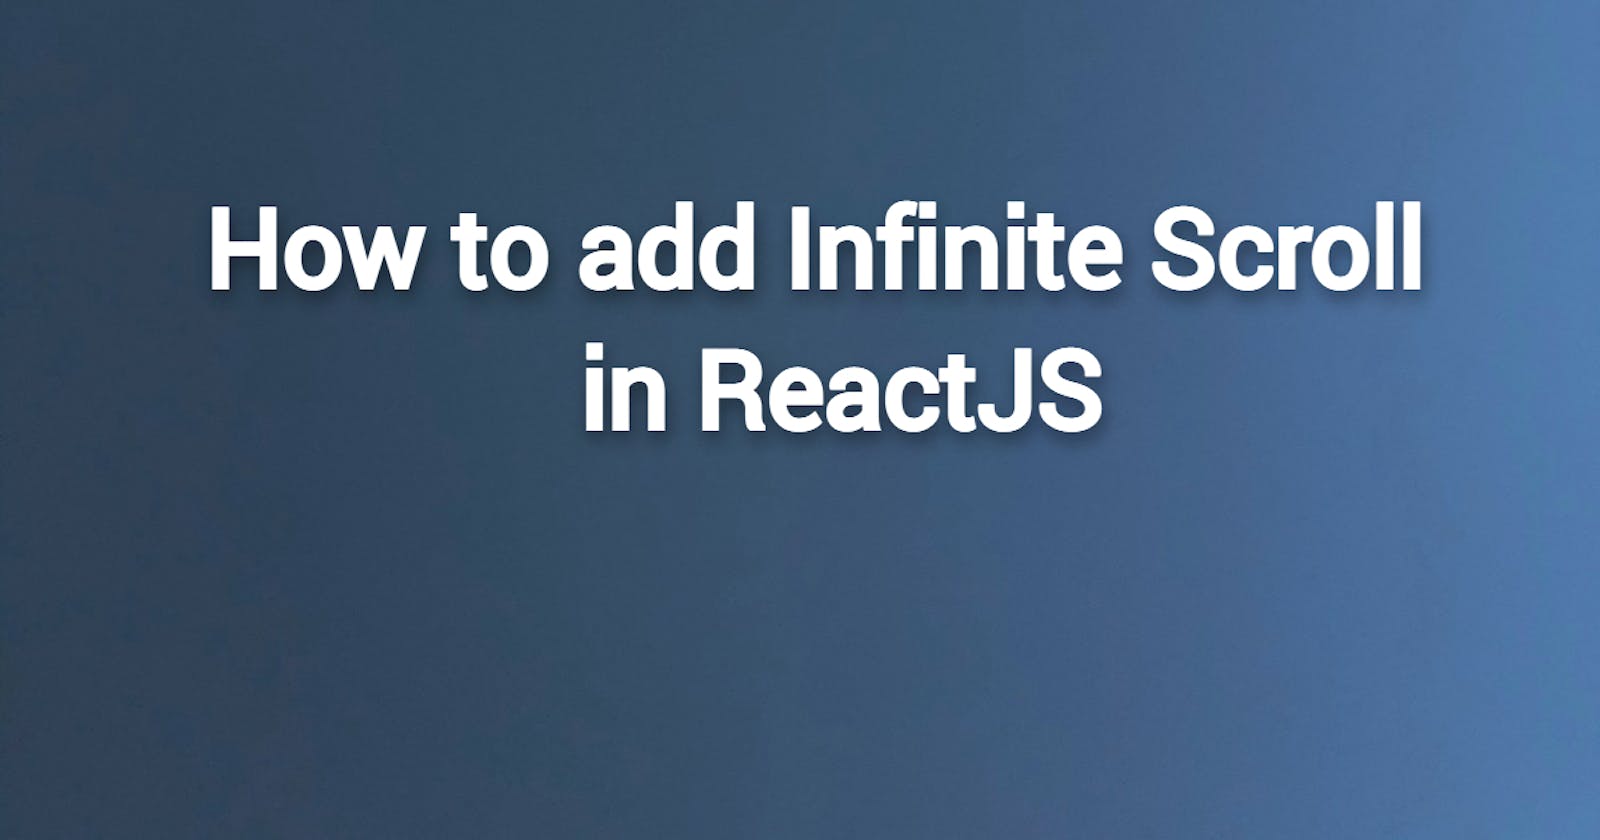 How to add Infinite Scroll in React Project